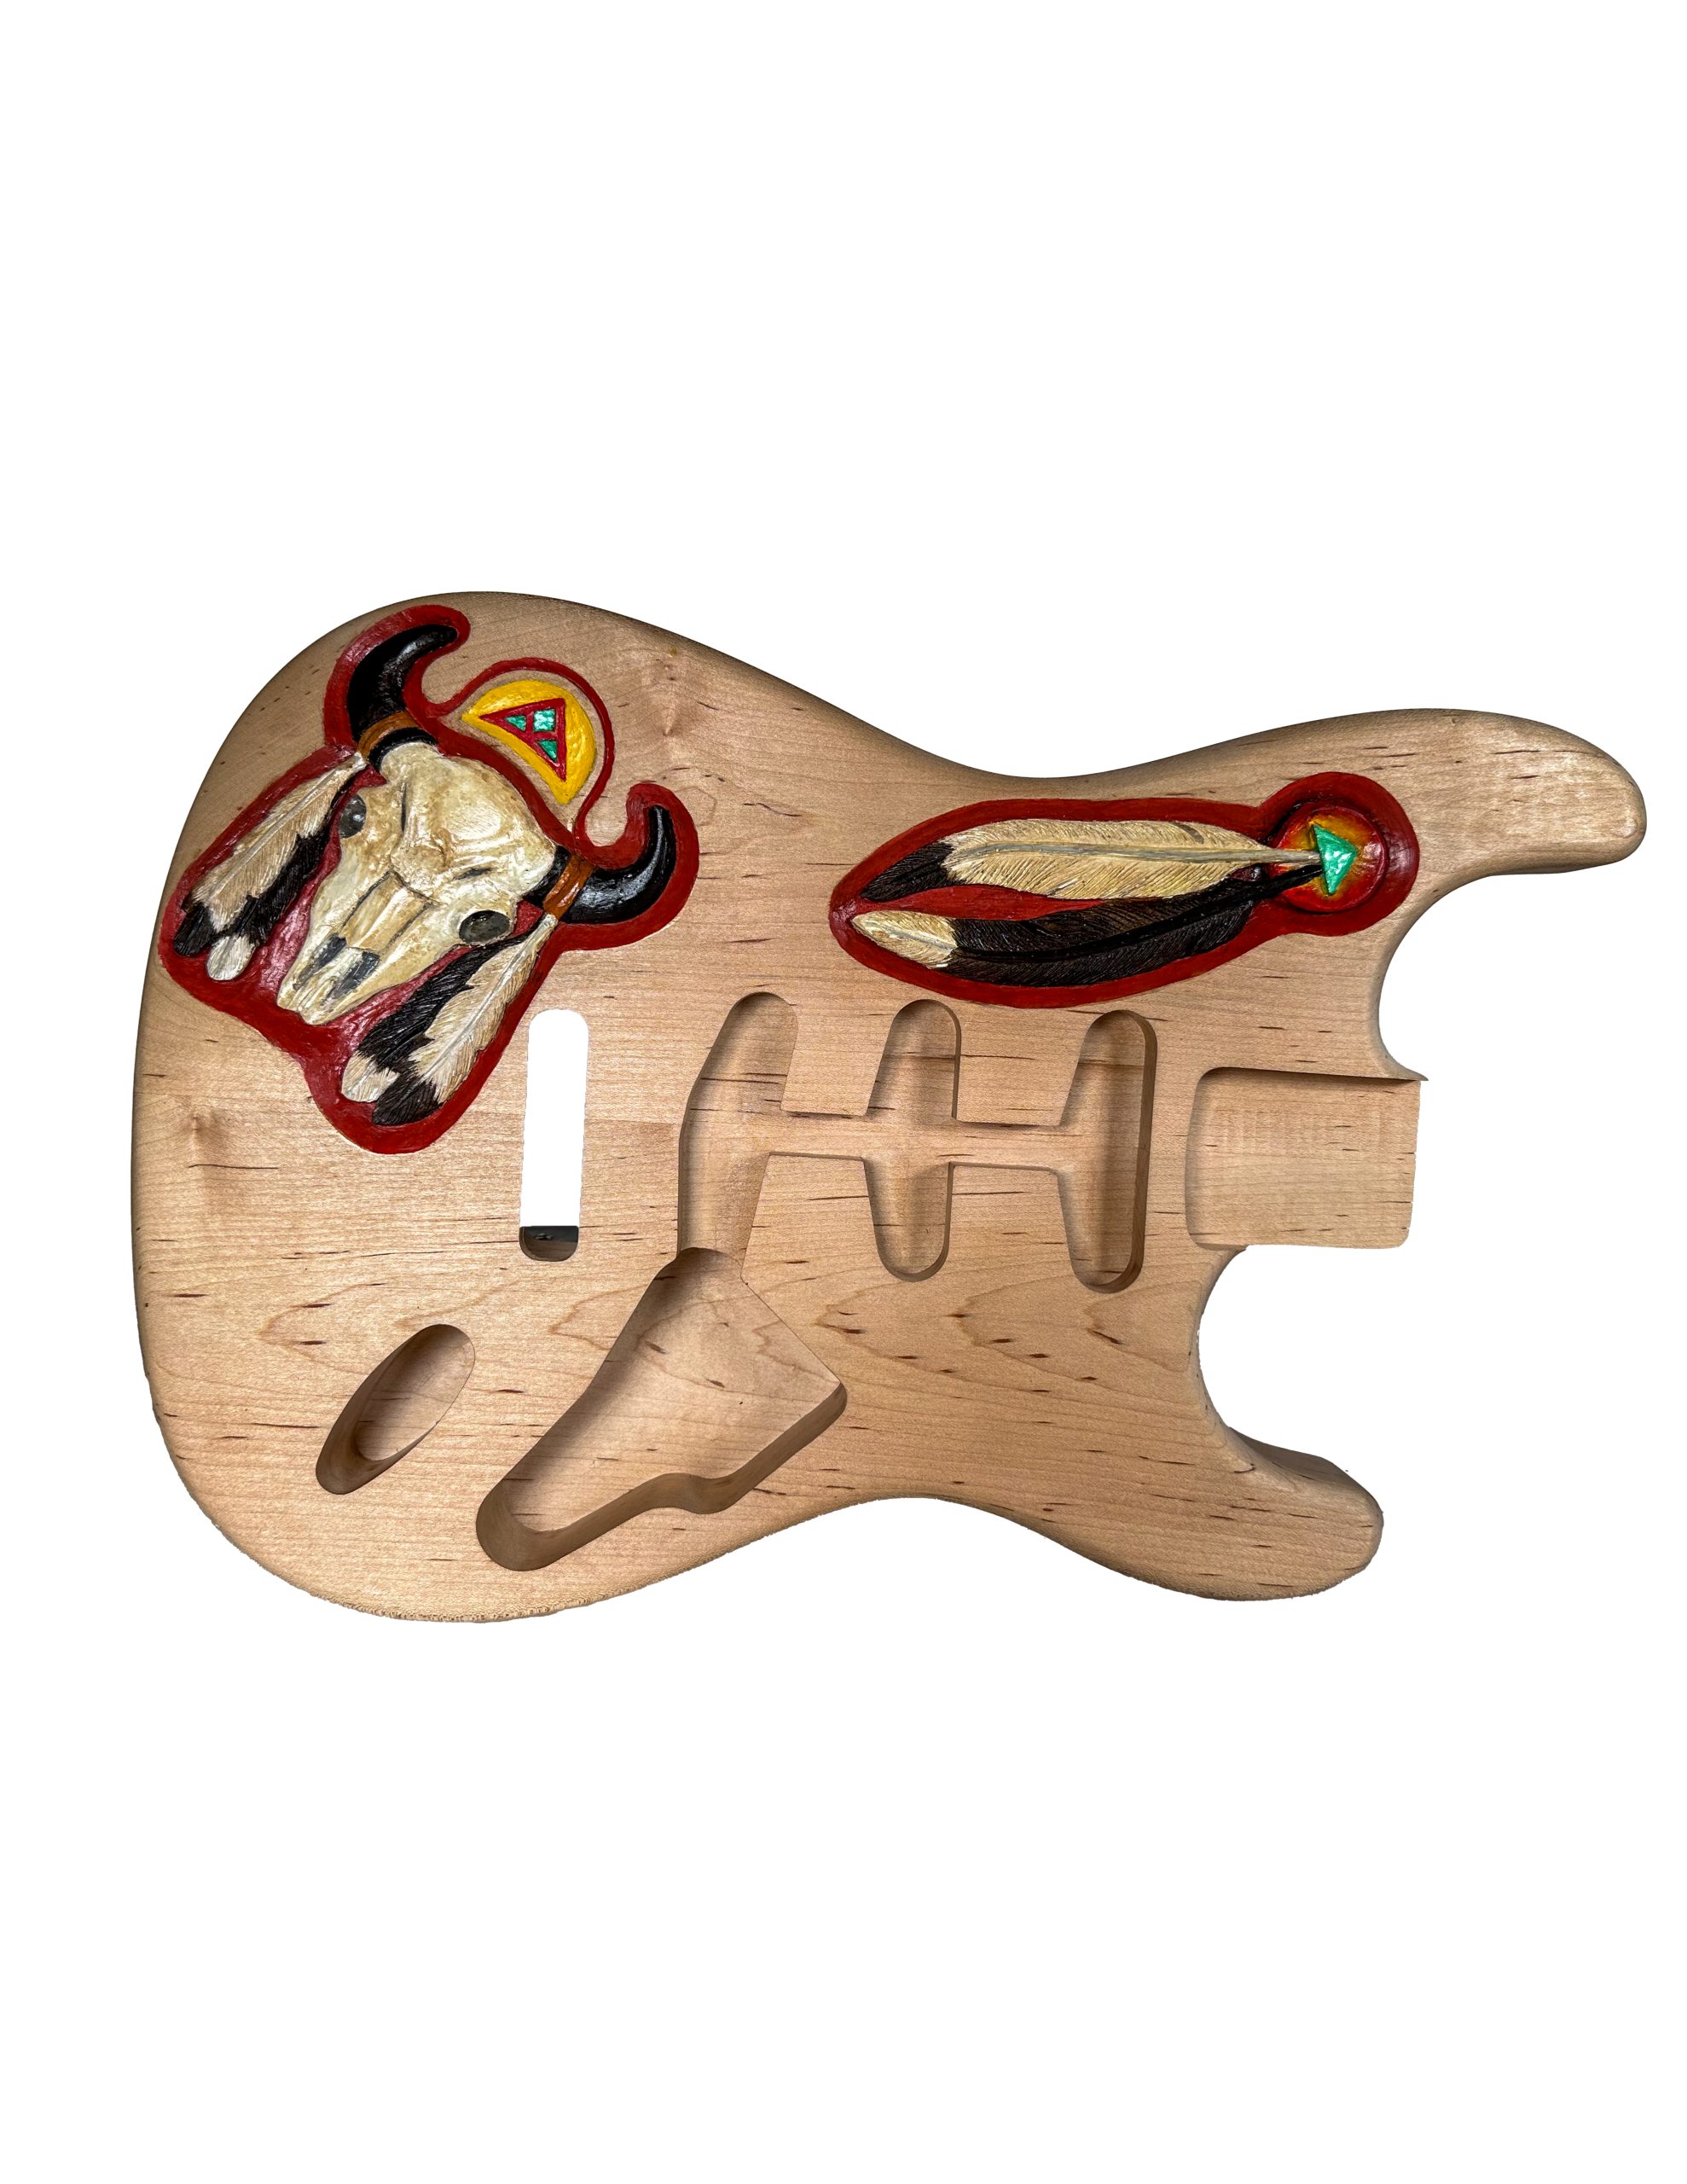 Custom Maple Stratocaster Body - Montana Carvings - Cow Skull, Two Feathers